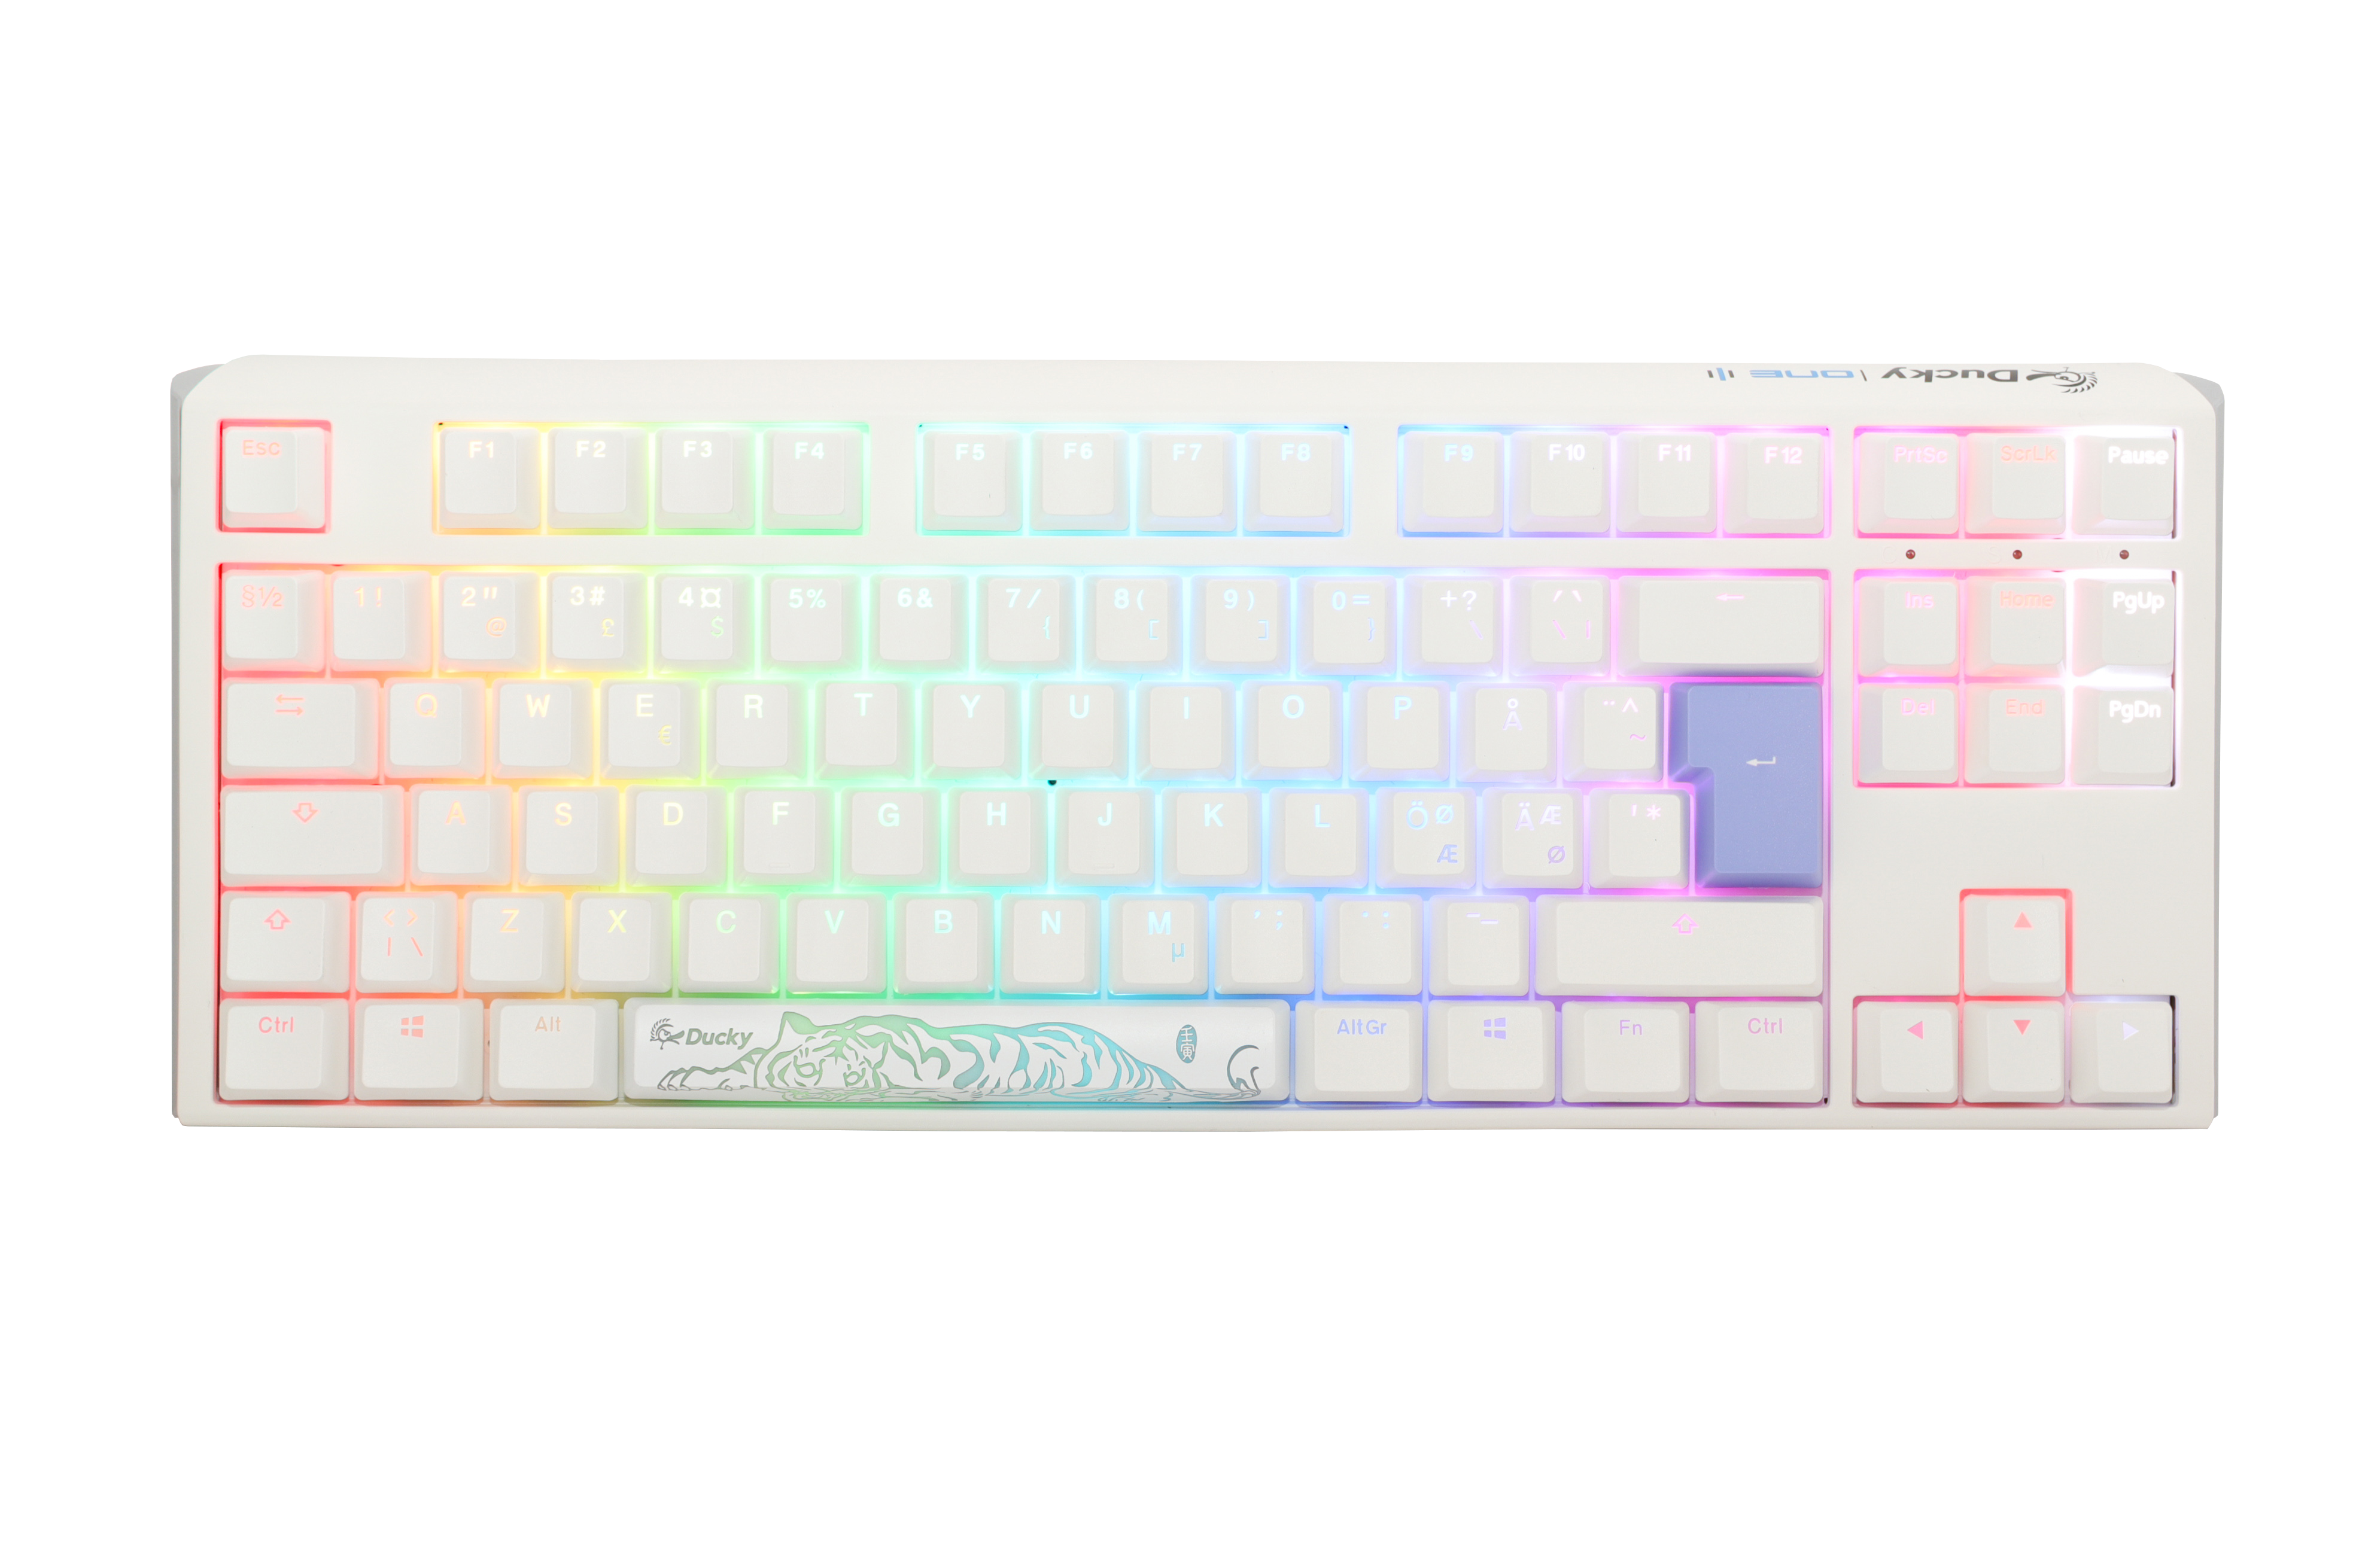 A Ducky white mechanical keyboard with PBT keycaps and pastel-colored, backlit keys featuring RGB lighting. The space bar has an artistic, teal wave design.